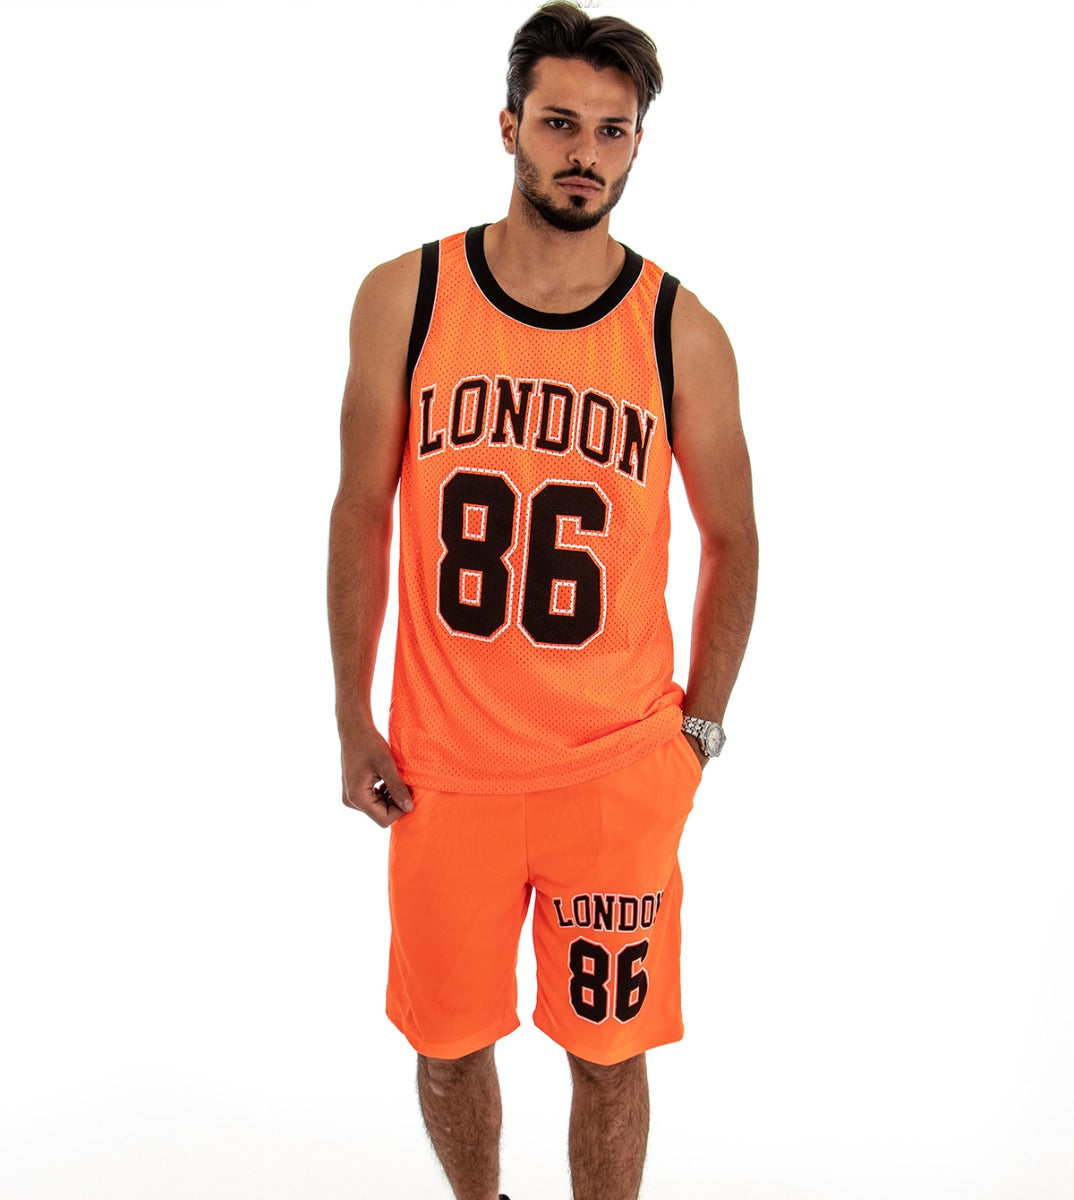 Complete Coordinated Set for Men Sports Outfit Orange Bermuda Tank Top GIOSAL-OU1547A